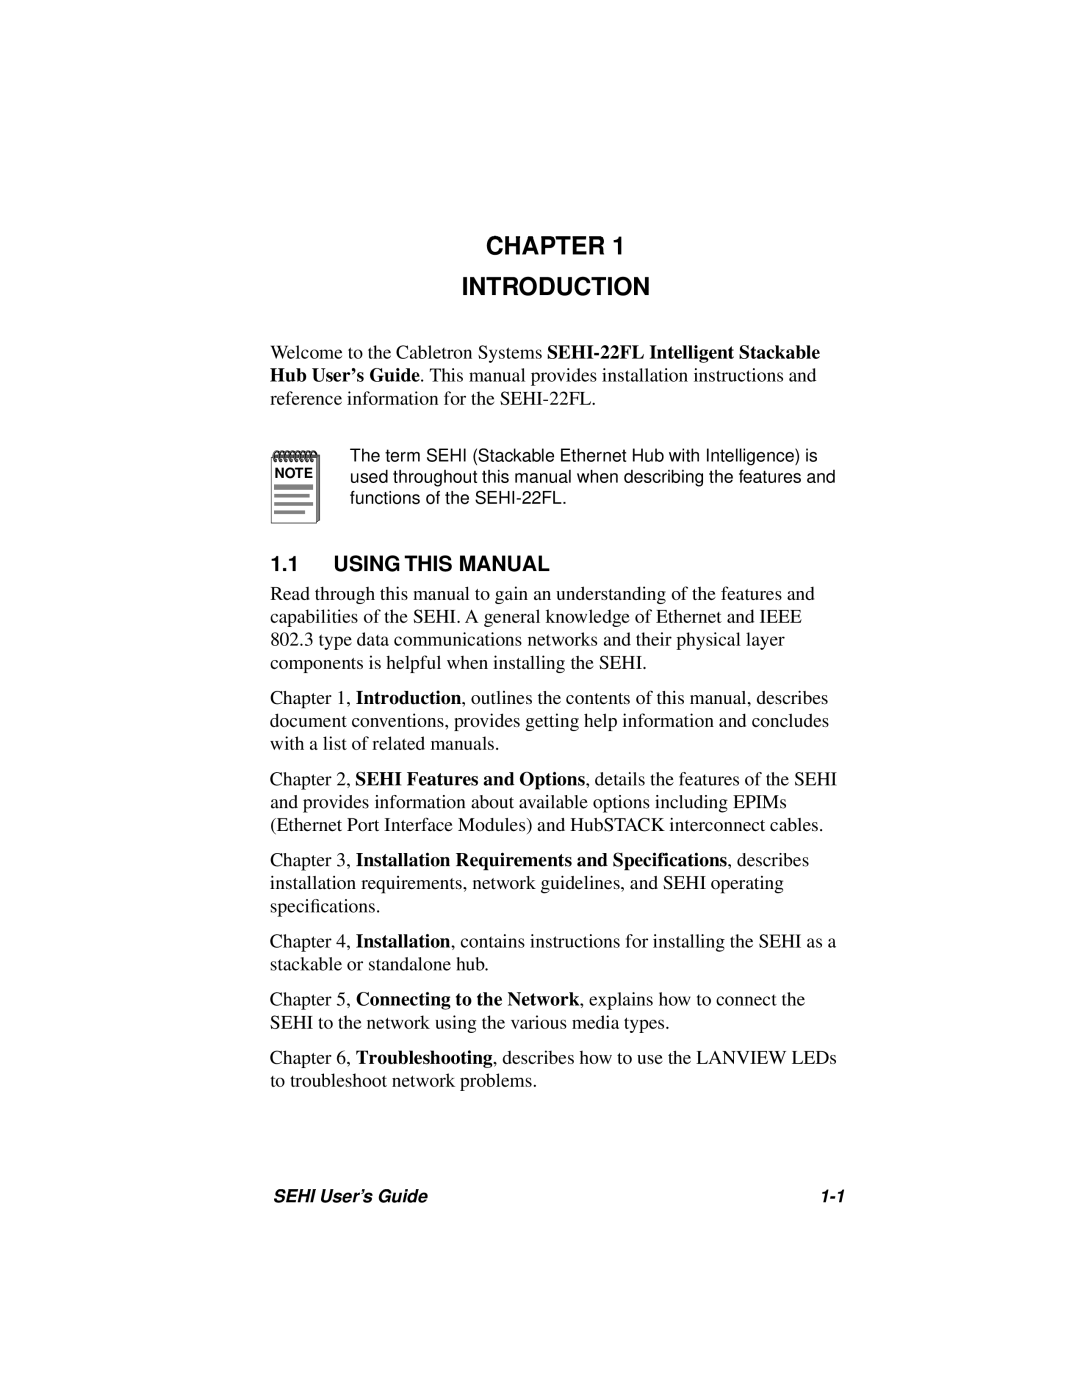 Cabletron Systems SEHI-22FL manual Chapter Introduction, Using This Manual 